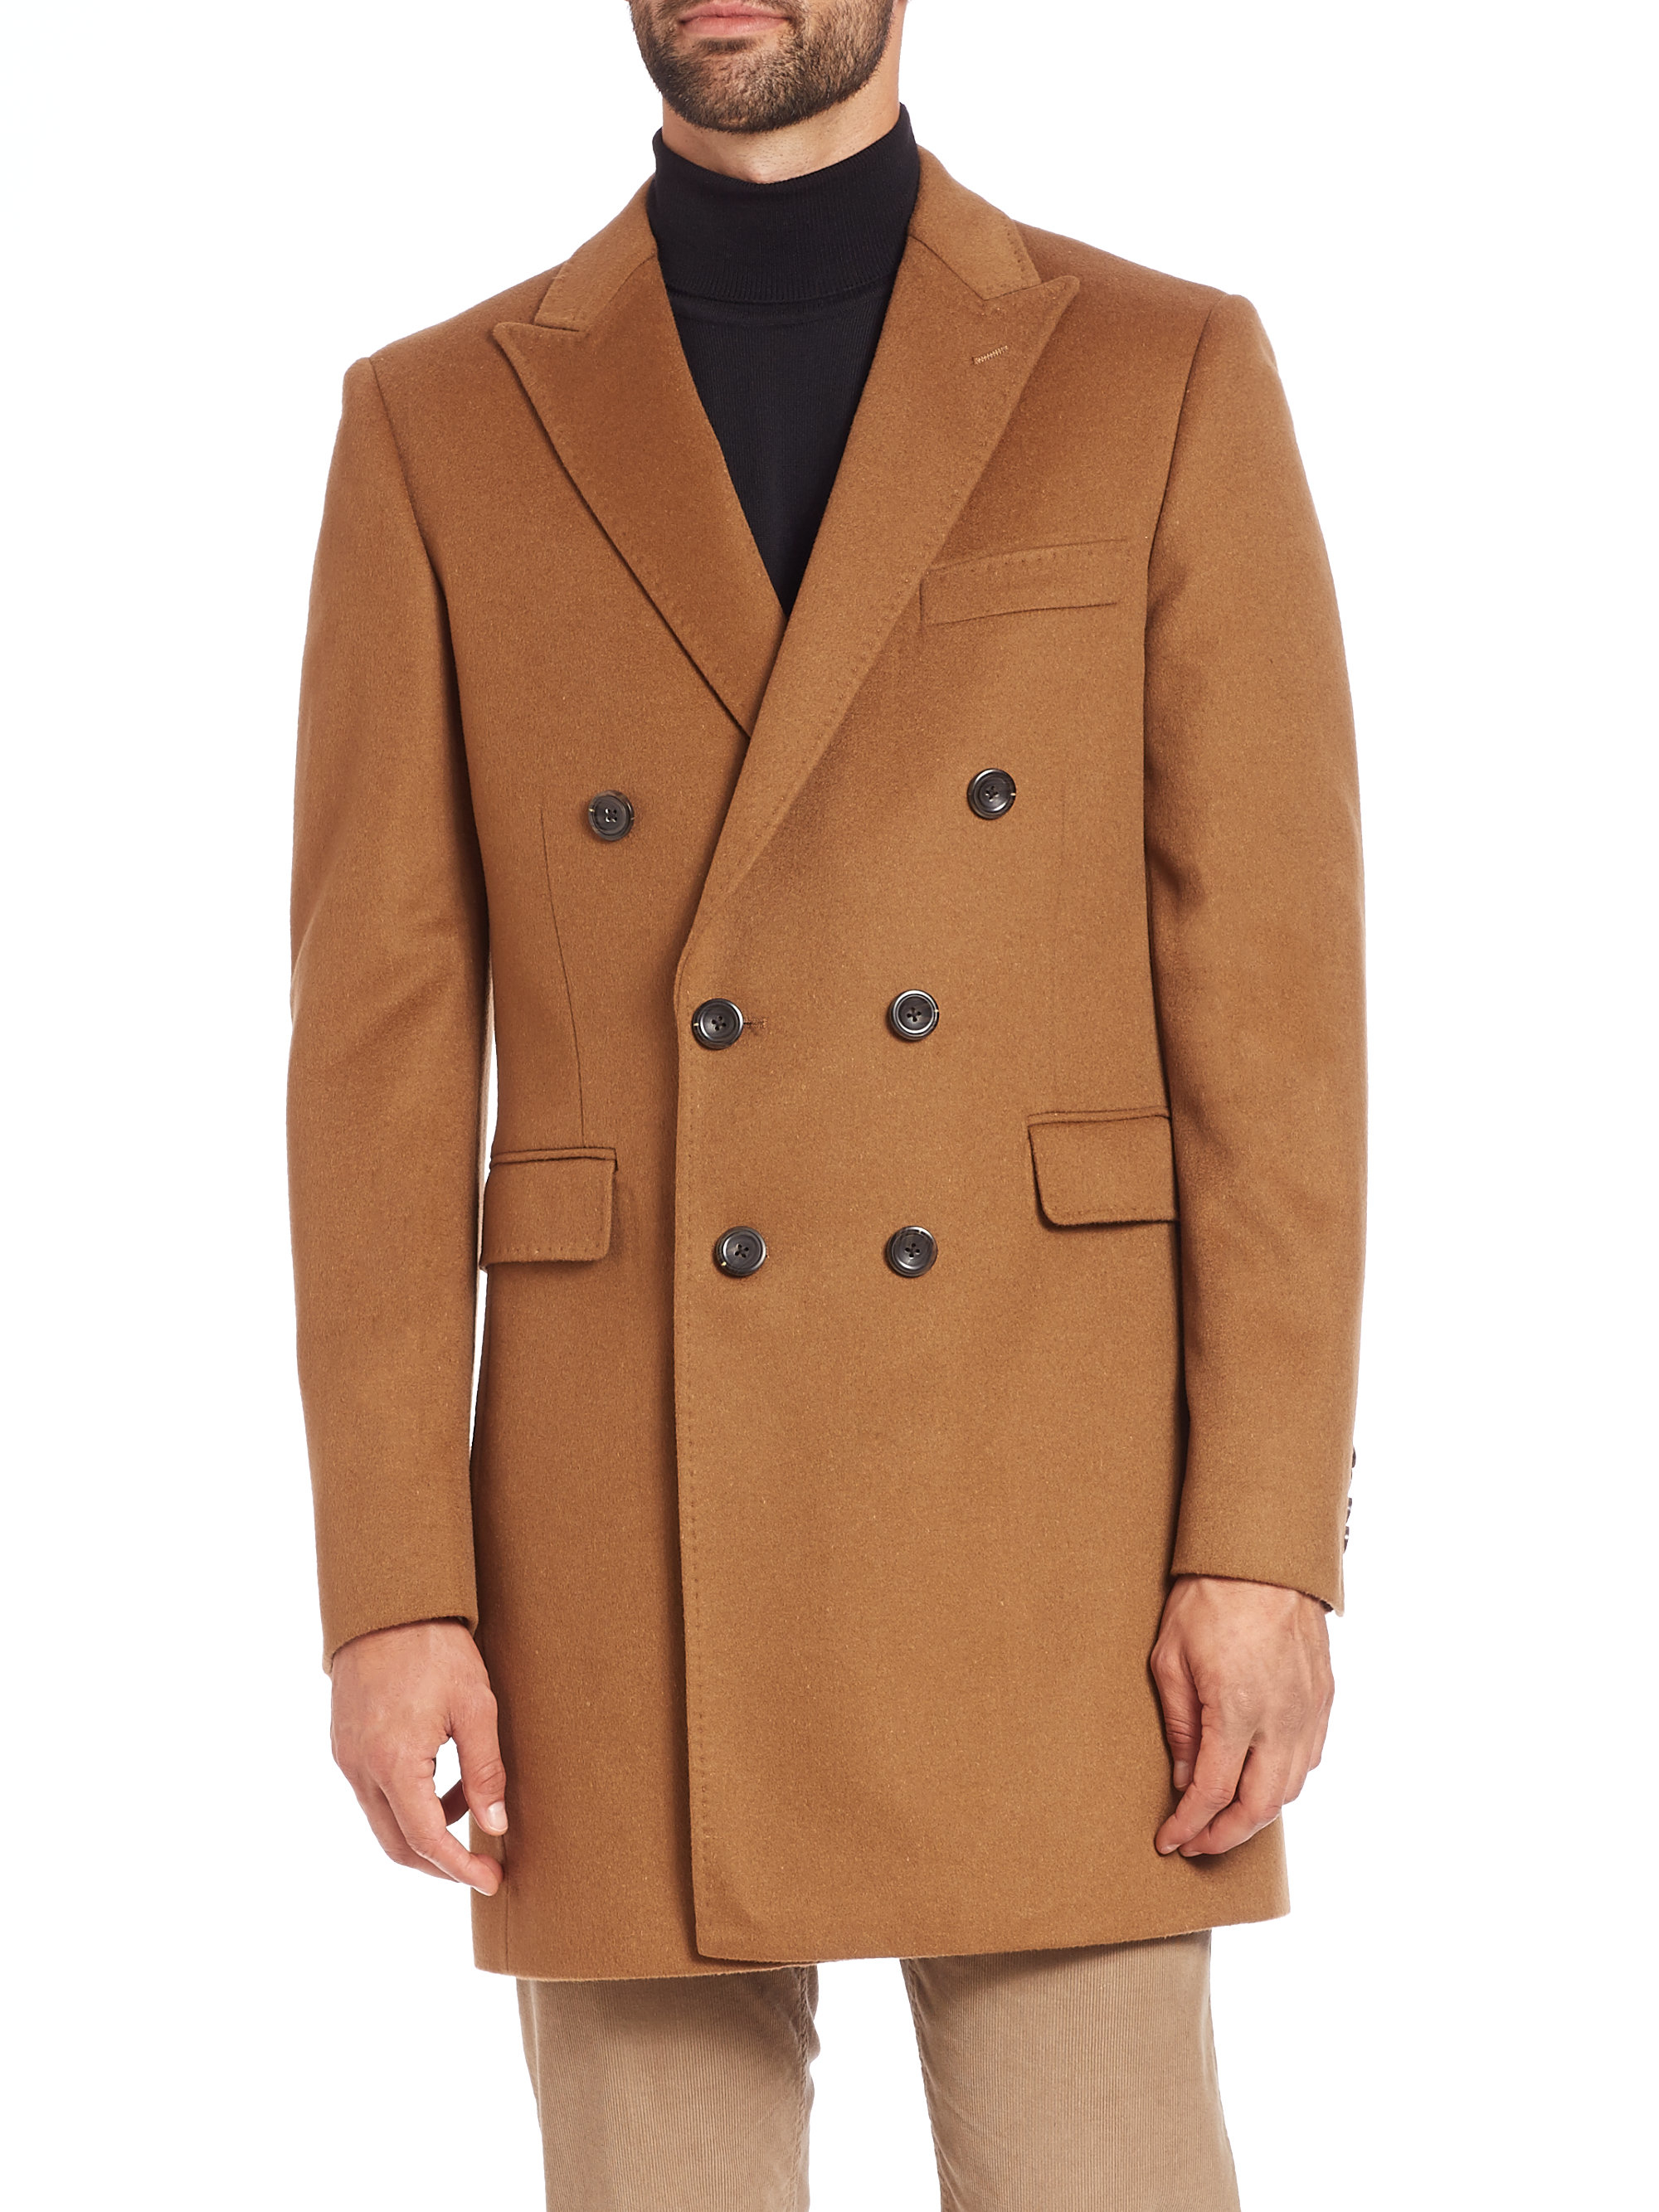 Lyst - Saks Fifth Avenue Double-breasted Wool & Cashmere Coat in